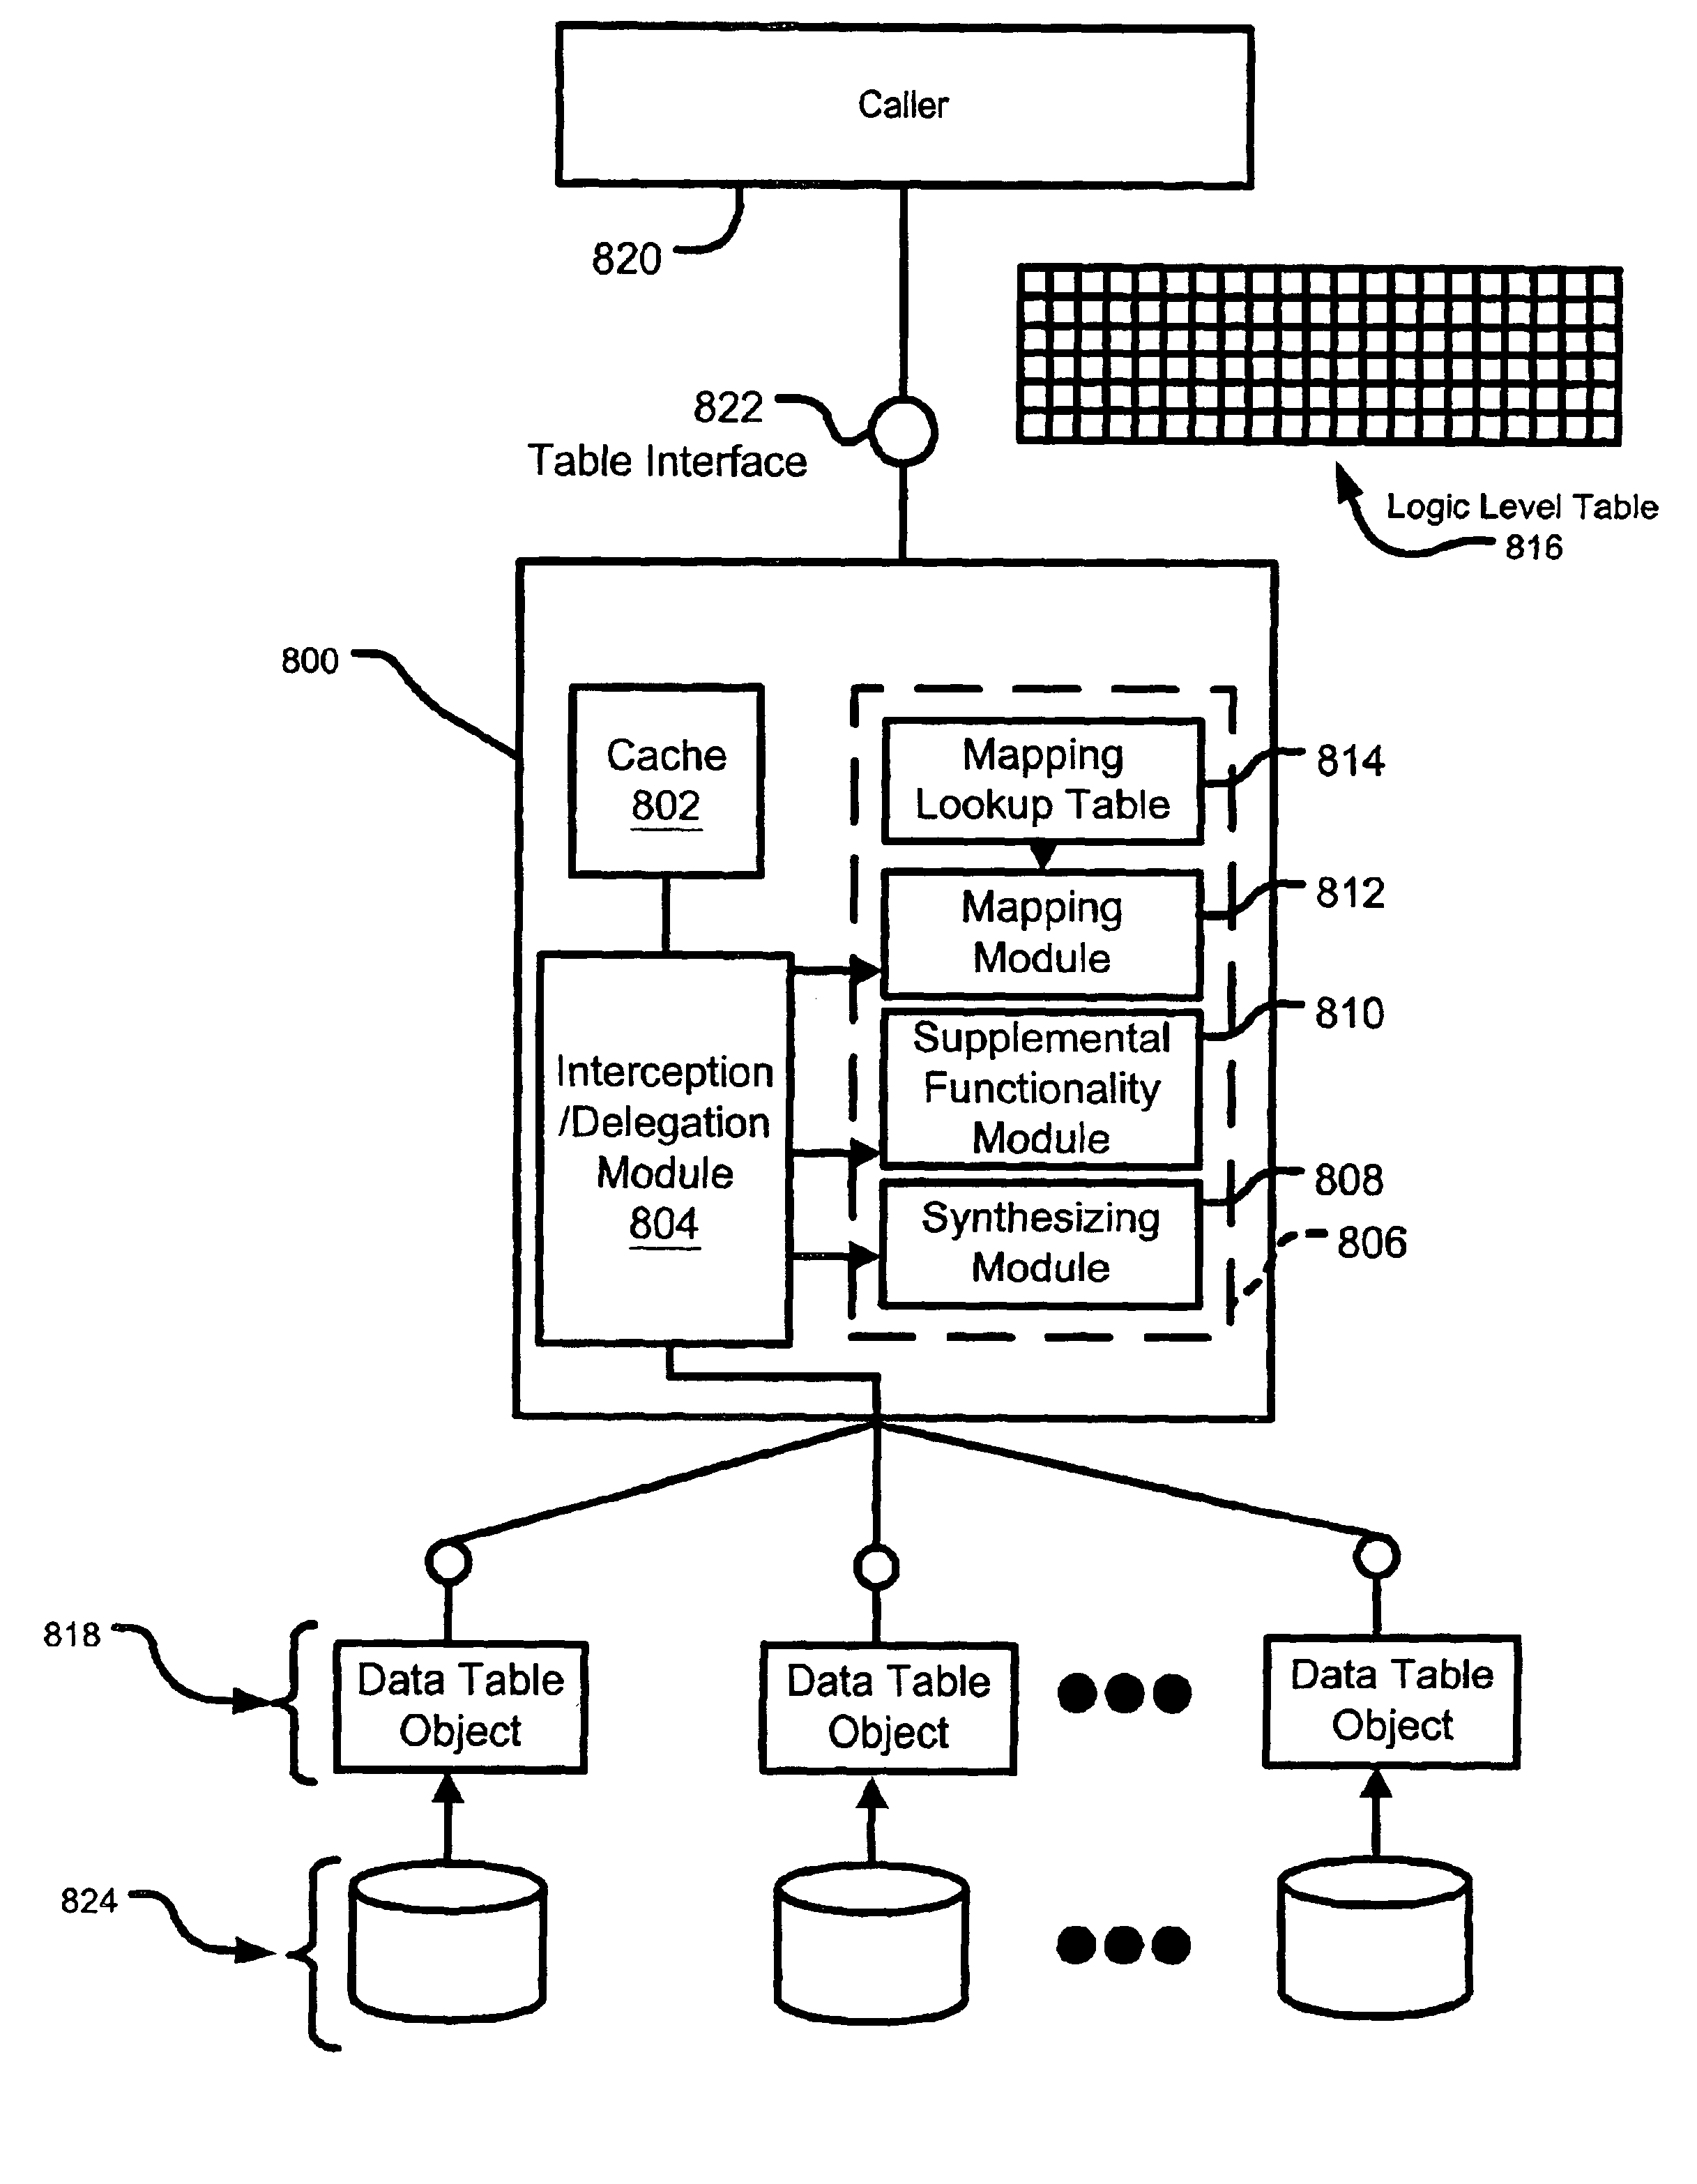 Catalog management system architecture having data table objects and logic table objects